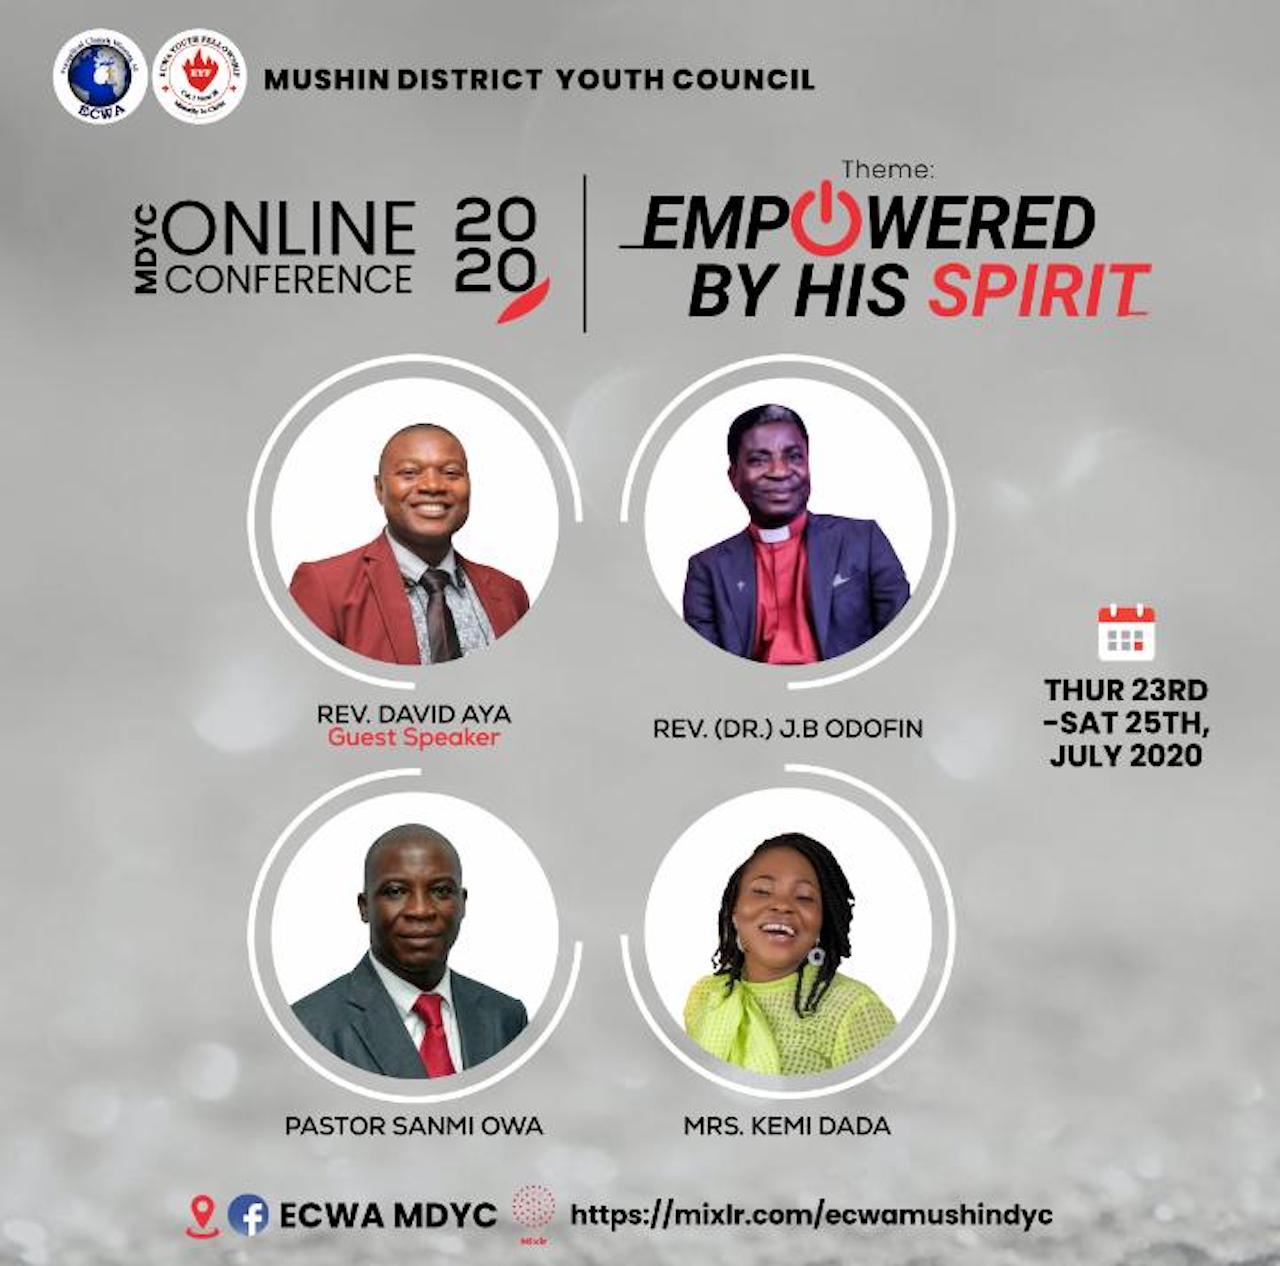 Proceedings of ECWA Mushin District Youth Council (MDYC) Online Conference July 23-25, 2020